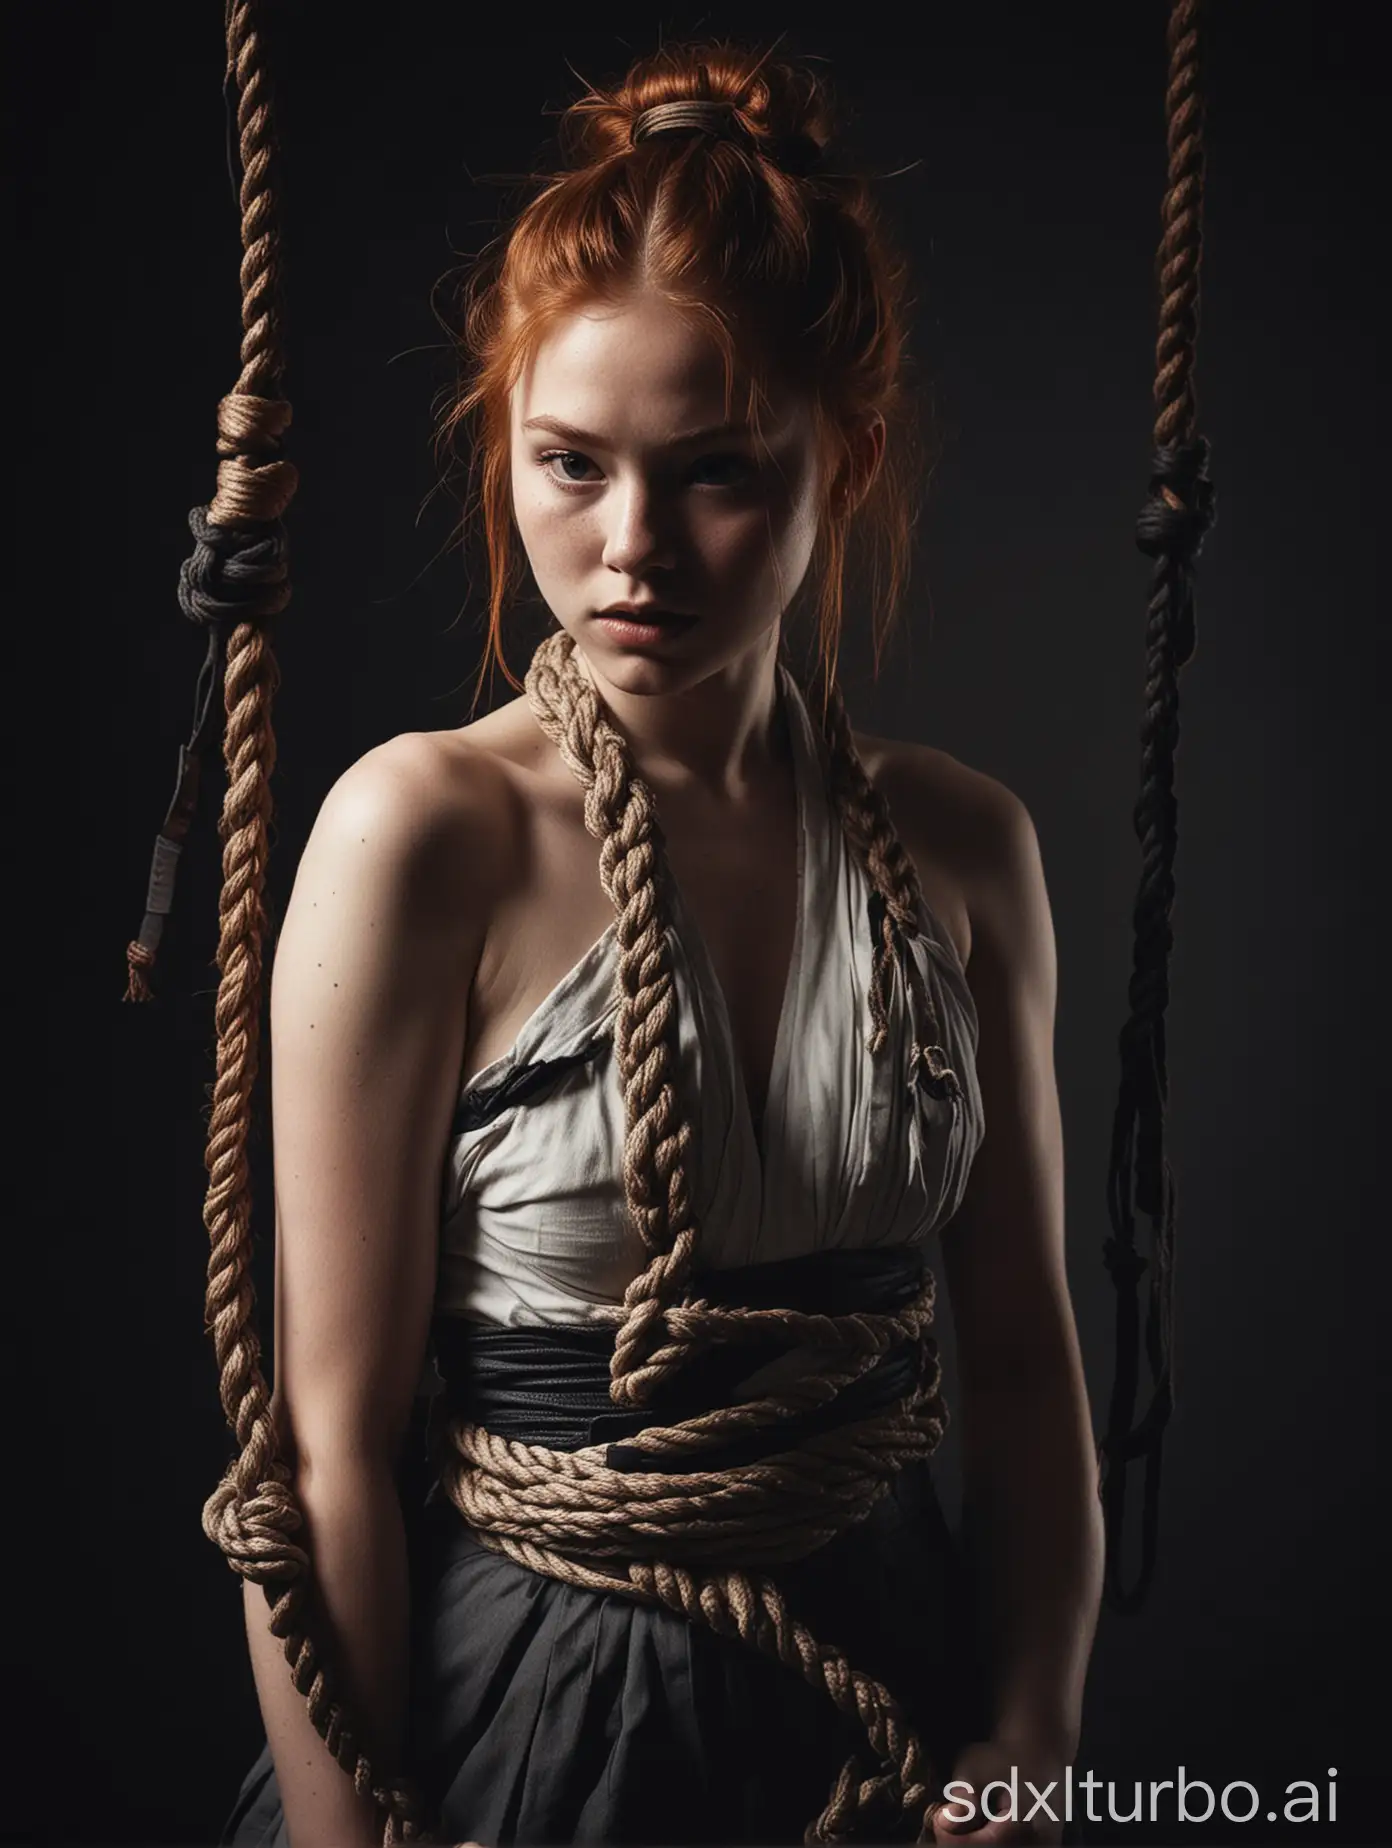 a masterpiece artistic photo of a beautiful 18 year old redhead woman with braided hair tied with black rope in Japanese shibari style, dramatic lighting